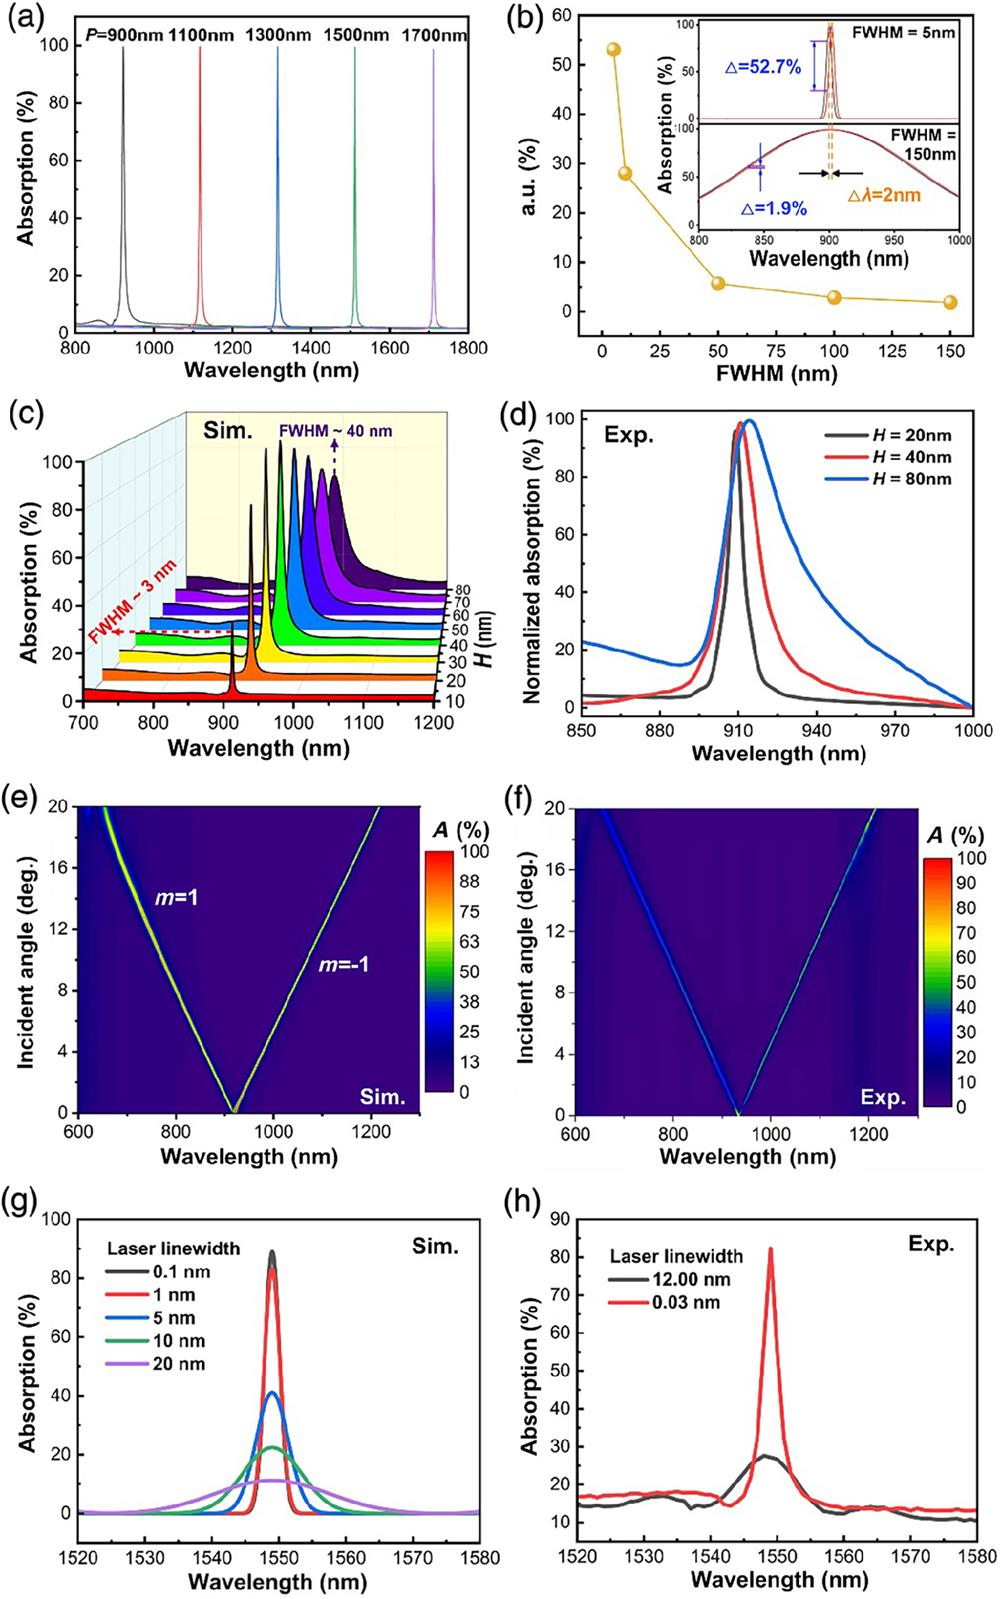 Optical characterization of Au/Si gratings. (a) Simulated absorption spectra for P=900, 1100, 1300, 1500, and 1700 nm. H=28 nm, W=550 nm, and tAu=60 nm. (b) Maximum amplitude variation of a normalized Lorentz-type on-resonance spectrum with different FWHMs, assuming a same resonance shift of 2 nm. The insets show the cases of FWHM=5 and 150 nm. (c), (d) Calculated and normalized measured absorption spectra for H=20, 40, and 80 nm. P=900 nm, W=500 nm, and tAu=60 nm. (e), (f) Calculated and measured absorption spectra at different incidence angles. P=900 nm, H=28 nm, W=550 nm, and tAu=60 nm. (g) Calculated absorption spectra mimicking the wavelength-scanning measurement process in the cases of different passband linewidth settings of the AOTF. P=900 nm, H=28 nm, W=477 nm, and tAu=60 nm. The incident angle is 45 deg. (h) Measured absorption spectra with both an NKT supercontinuum laser source (12 nm linewidth) and a Santec tunable laser (0.03 nm linewidth).